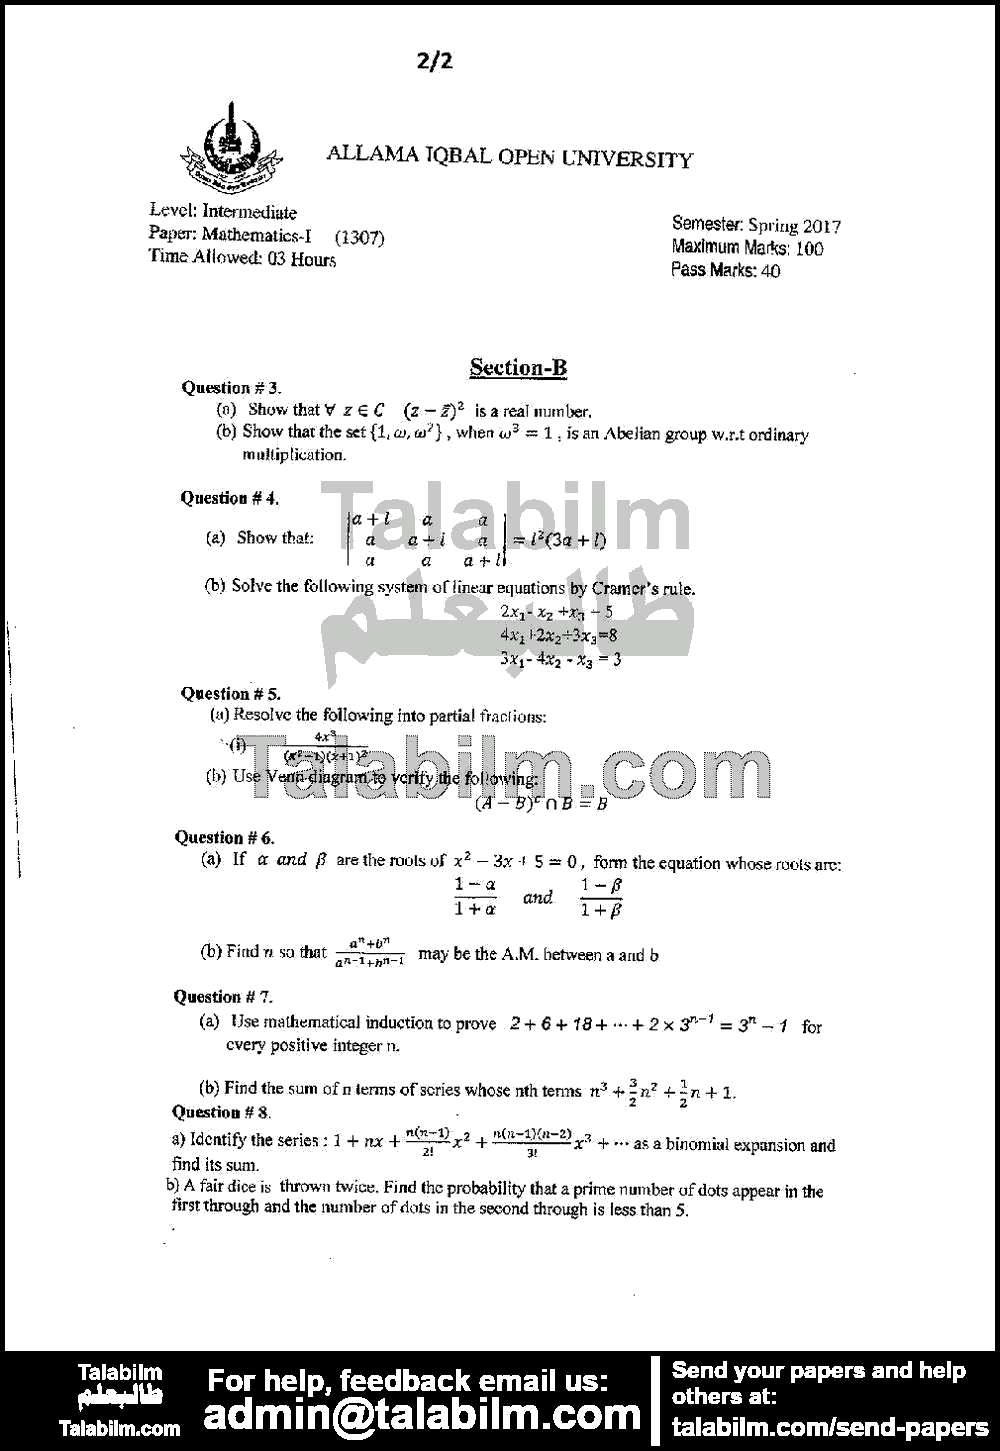 Mathematics-I 1307 past paper for Spring 2017 Page No. 2